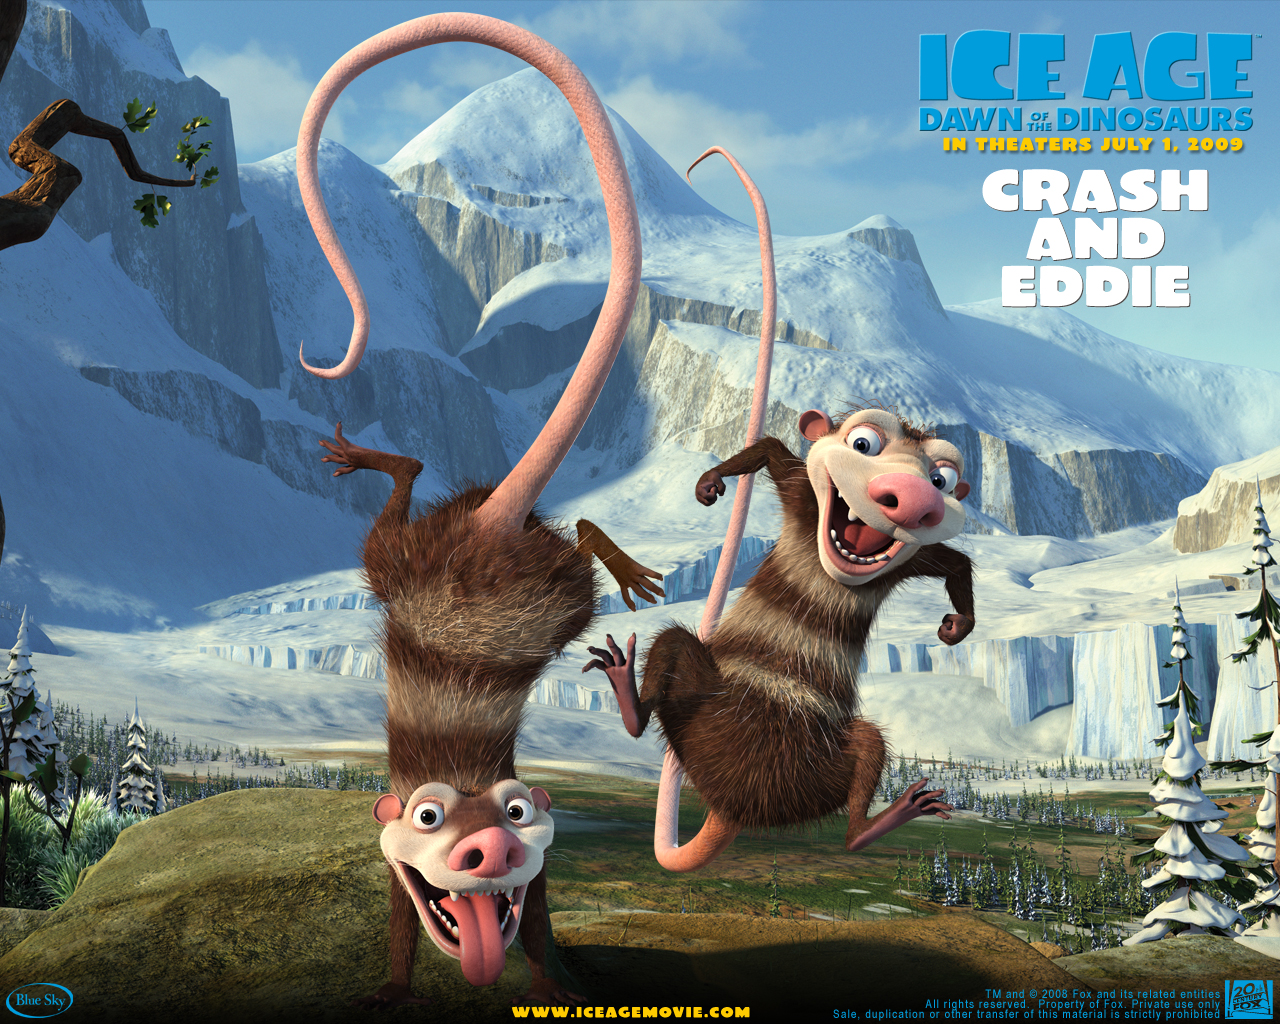 Ice Age Dawn of the Dinosaurs: Crash and Eddie